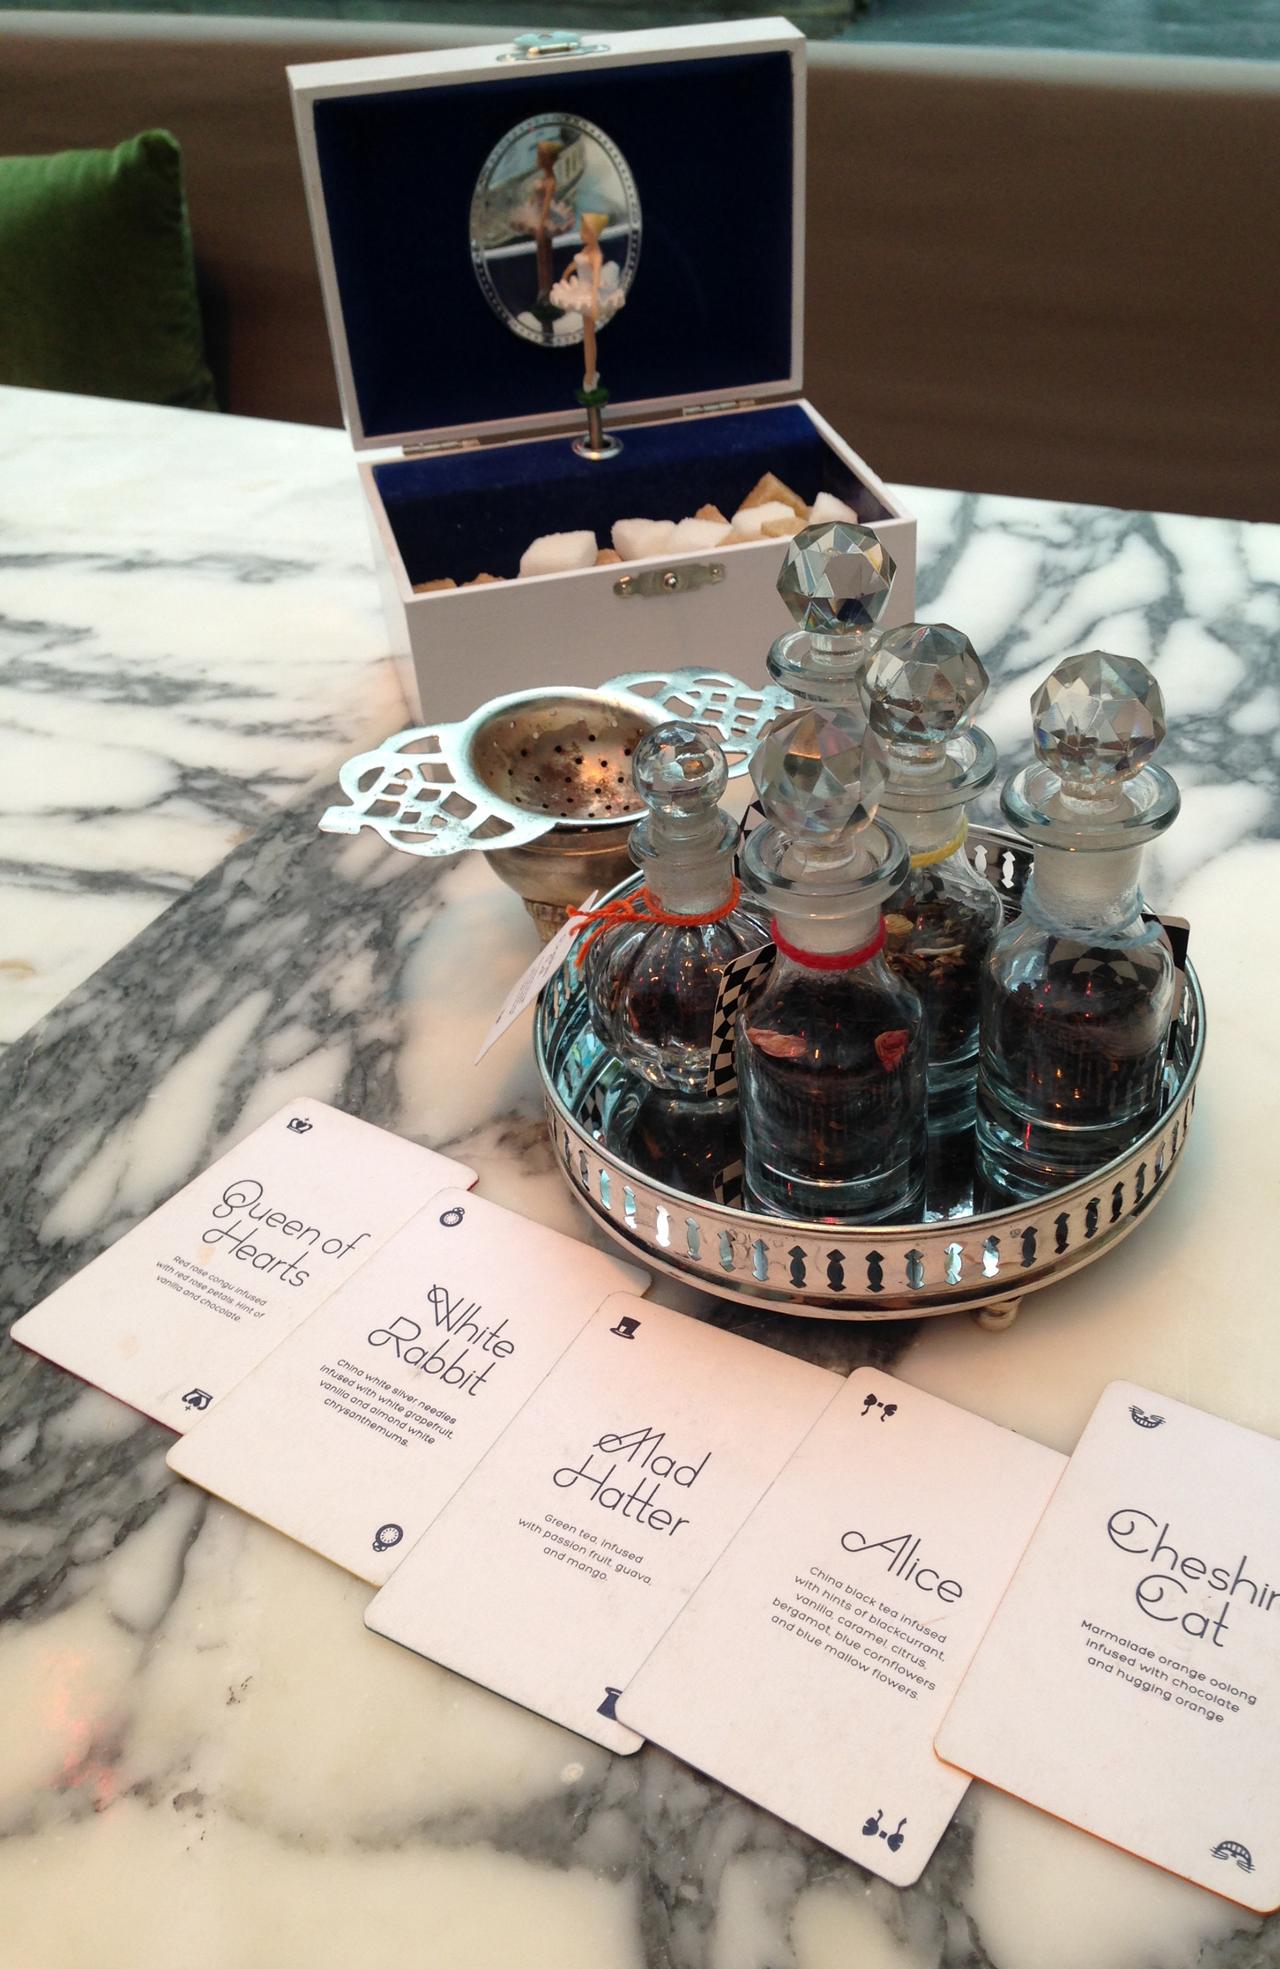 Supplied Travel Escape London Tea Time Twists - Mad Hatter's Tea, themed teas in glass stopper bottles. Image Ama